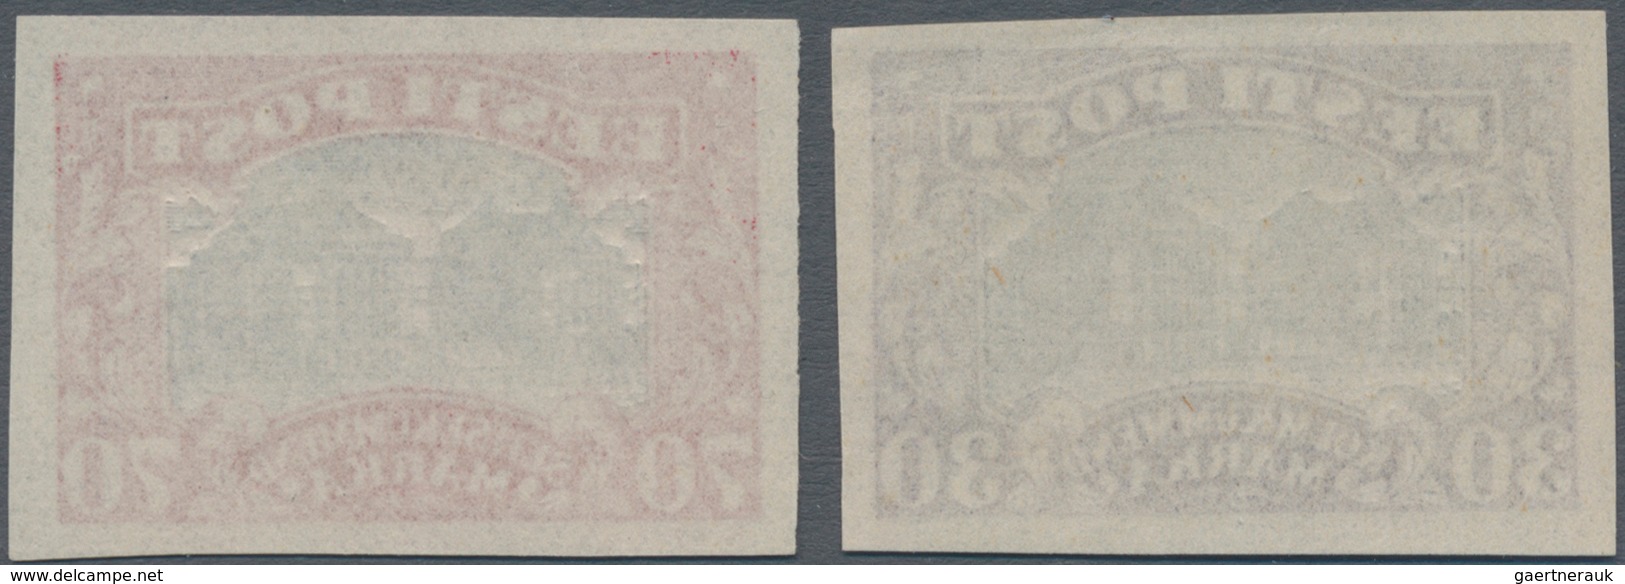 Estland: 1924,Nationaltheatre, 50 And 70 M Imperforated Proofs Without Gum. - Estonia